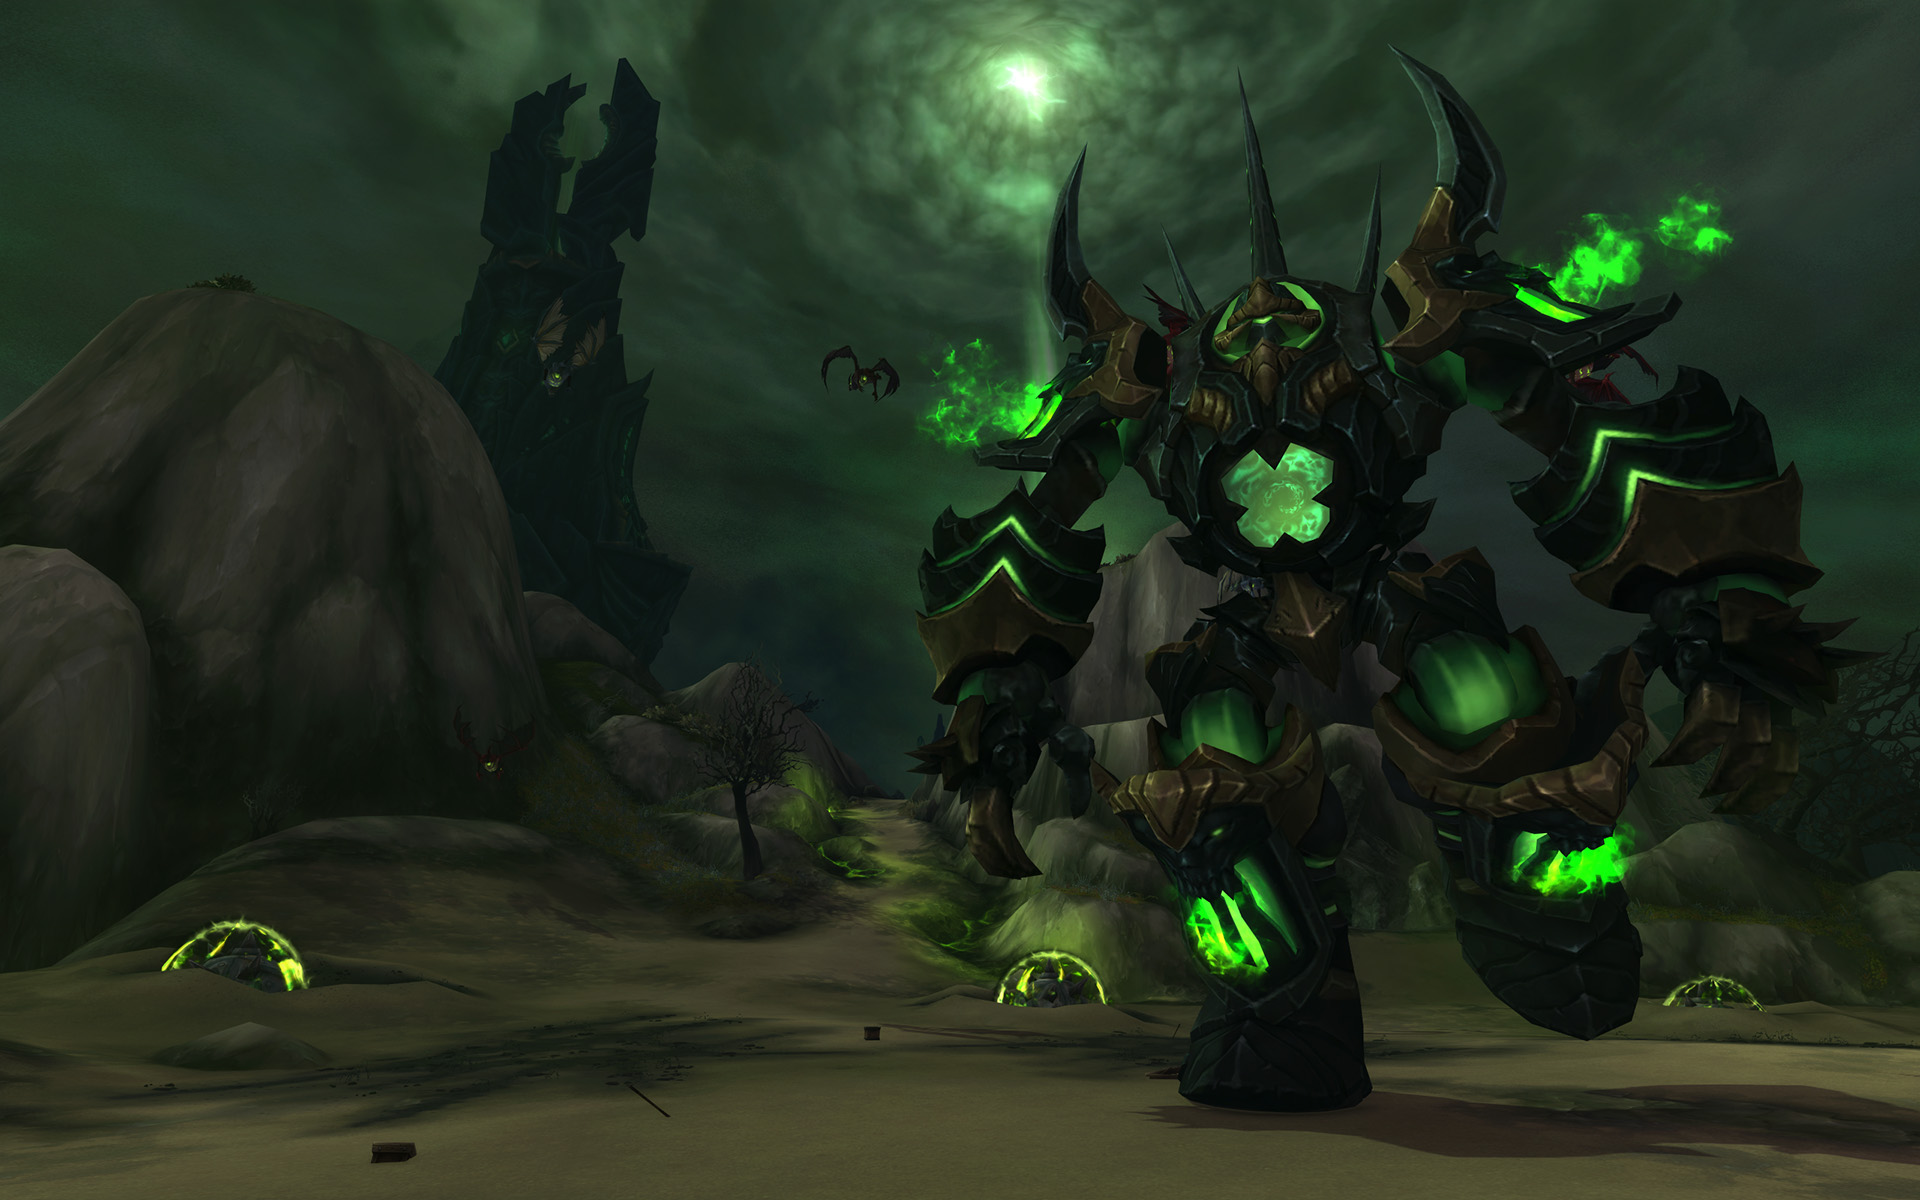 A screenshot from Patch 7.2 of World of Warcraft's Legion expansion pack, wherein a giant demonic robot sparking green fire walks across a desolate landscape. Behind the creature is a twisted tower, sickly green skies and a small bat-like demon.